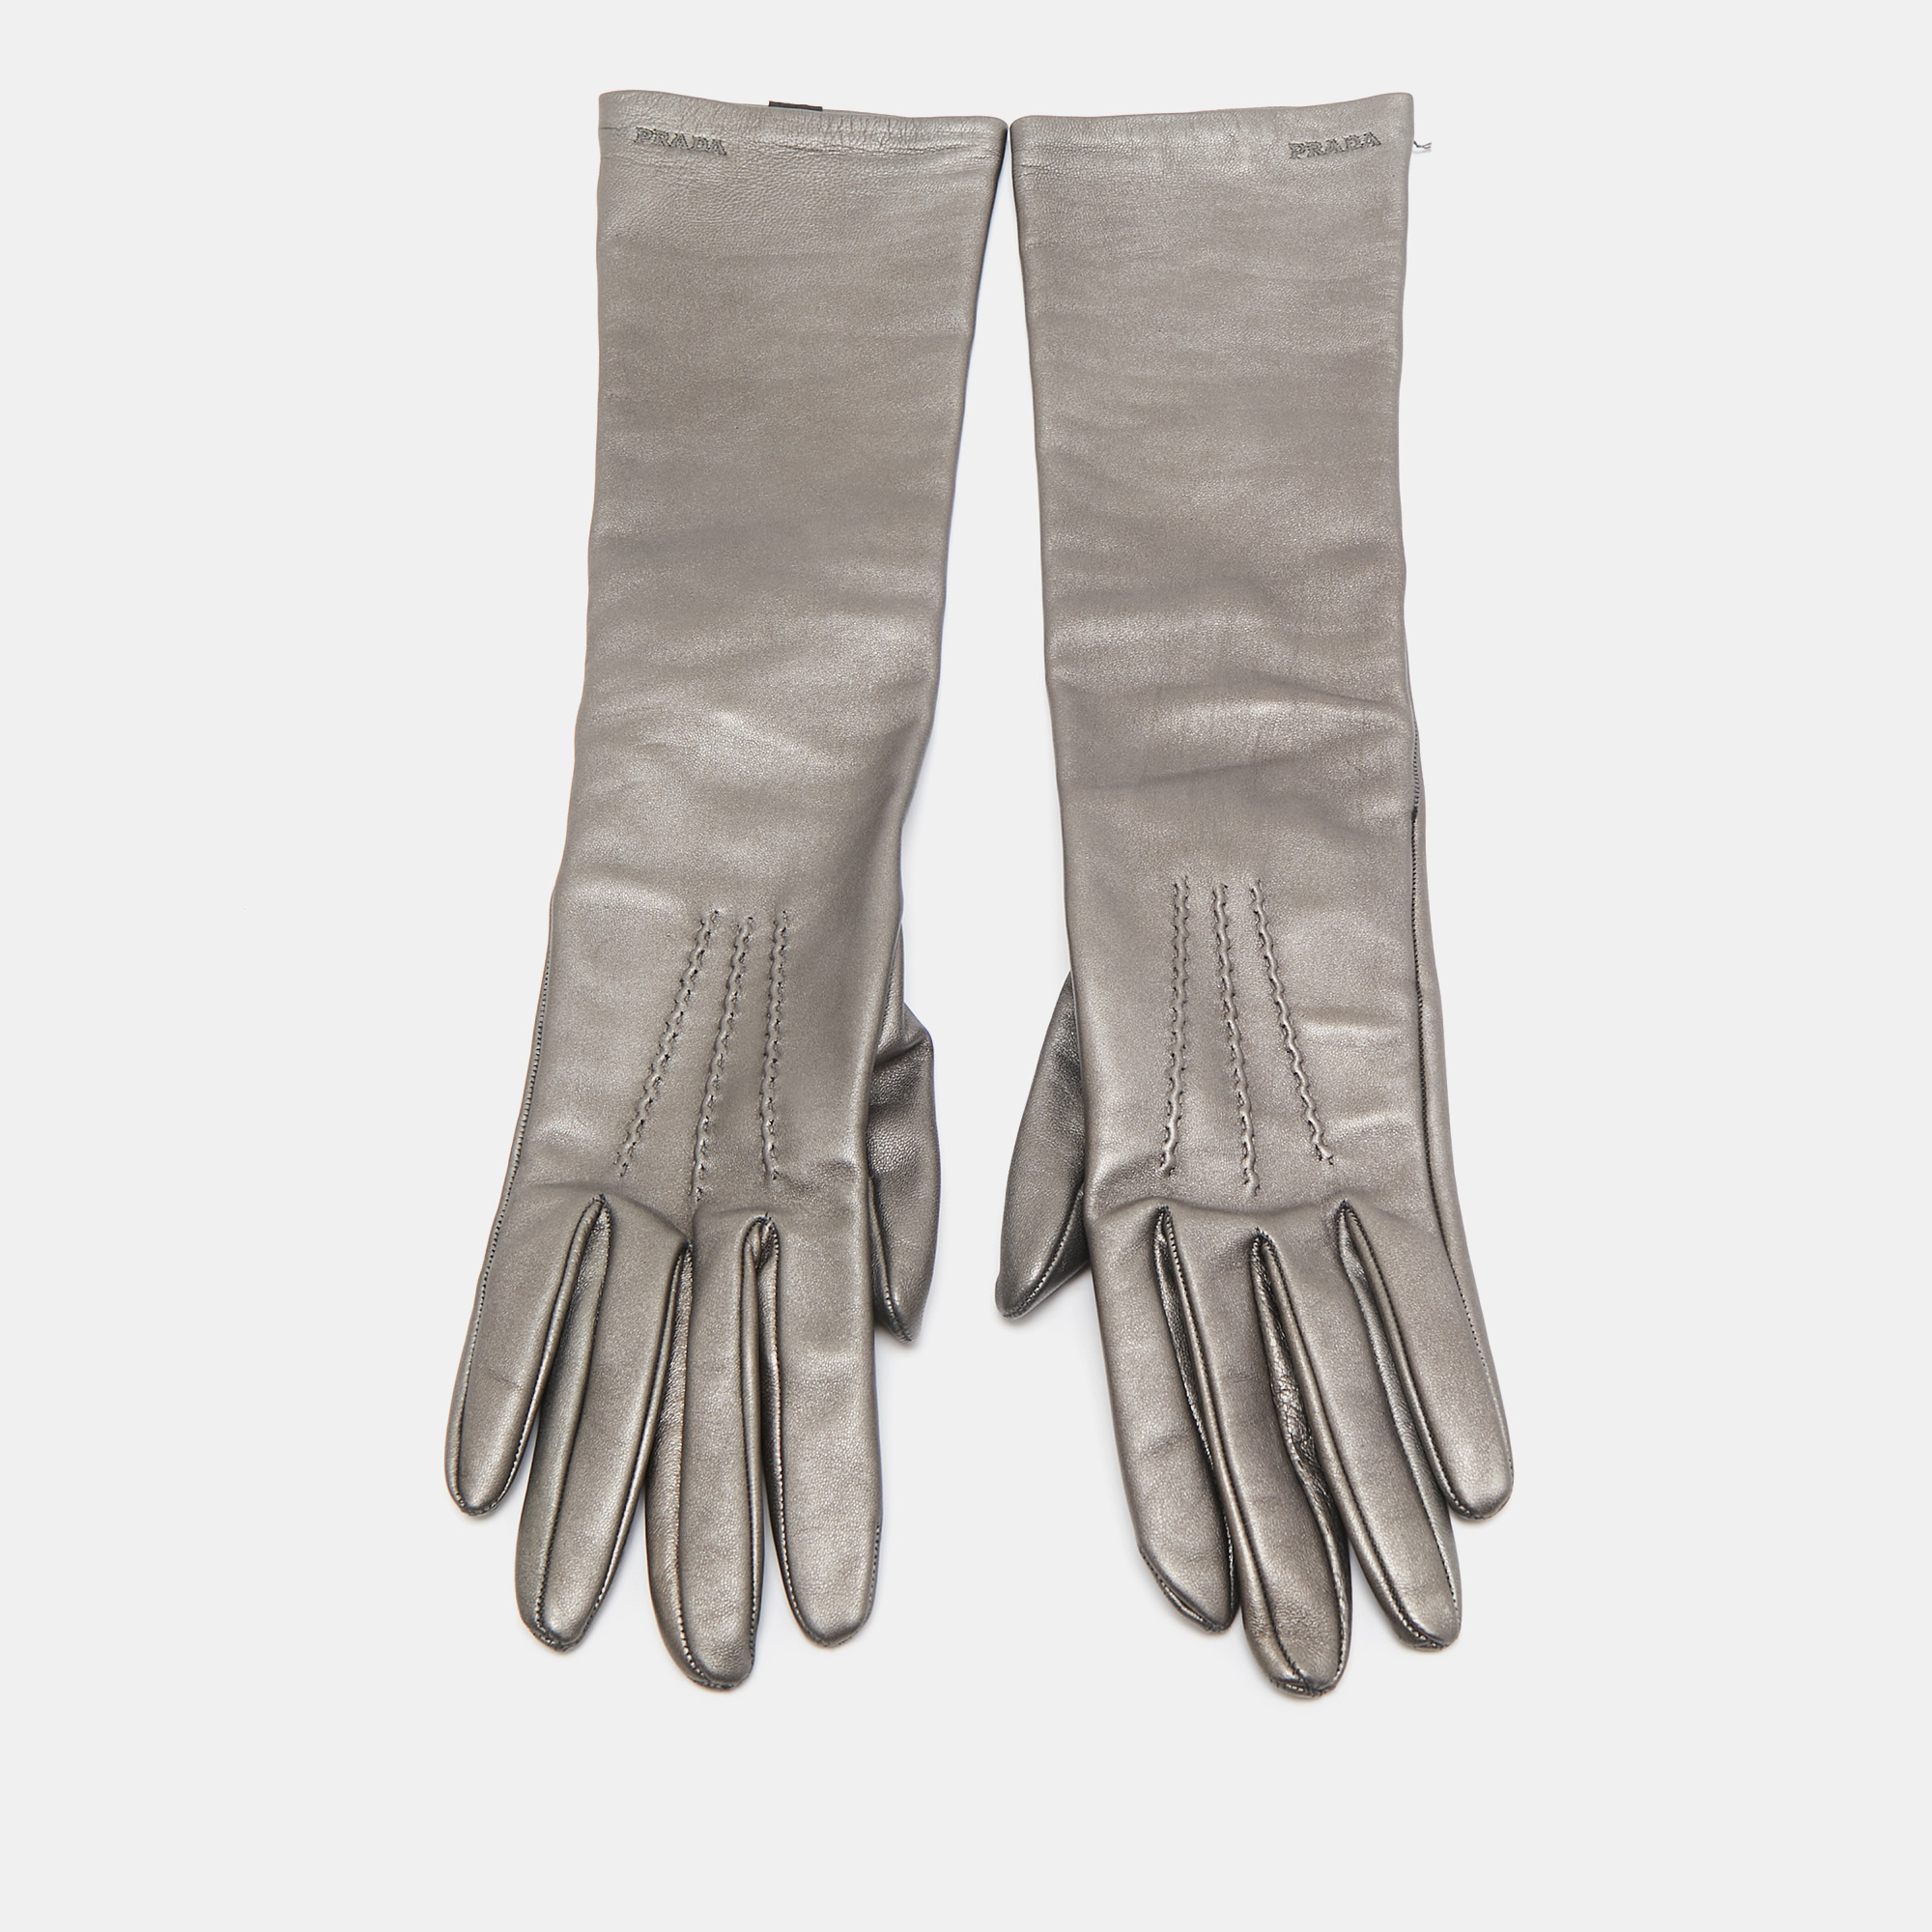 Pre-owned Prada Metallic Silver Leather Long Gloves Size 7.5